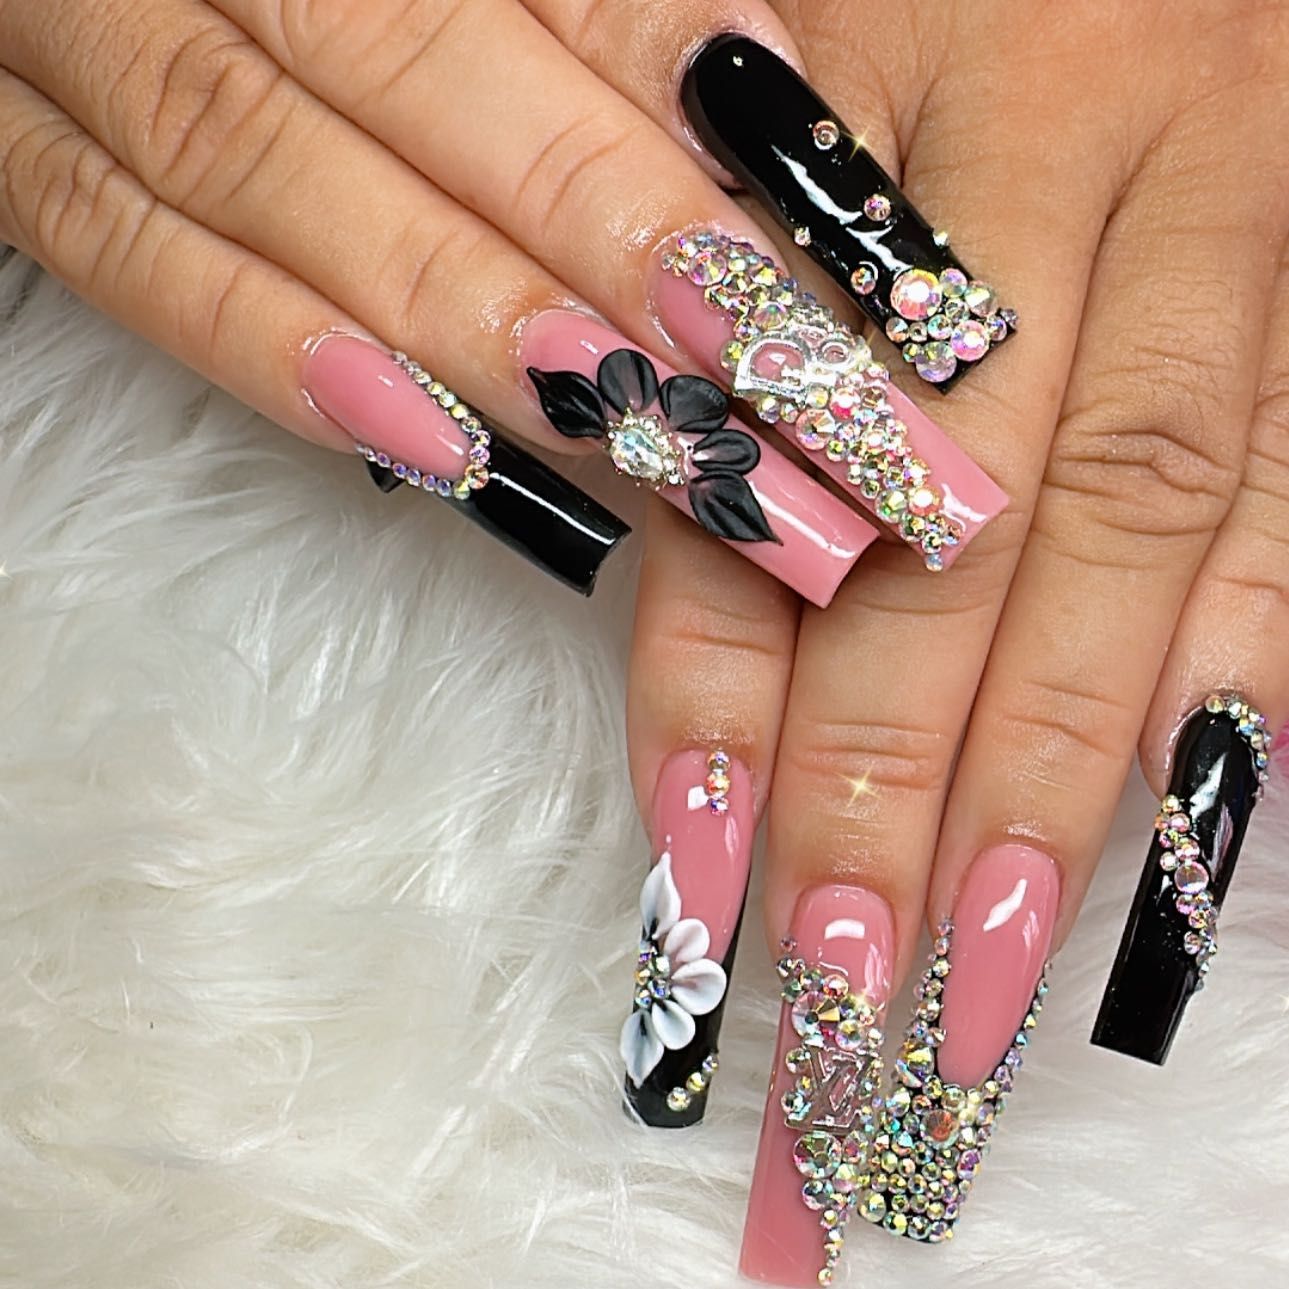 Josmairy nails, 525 Essex St, Lawrence, 01840